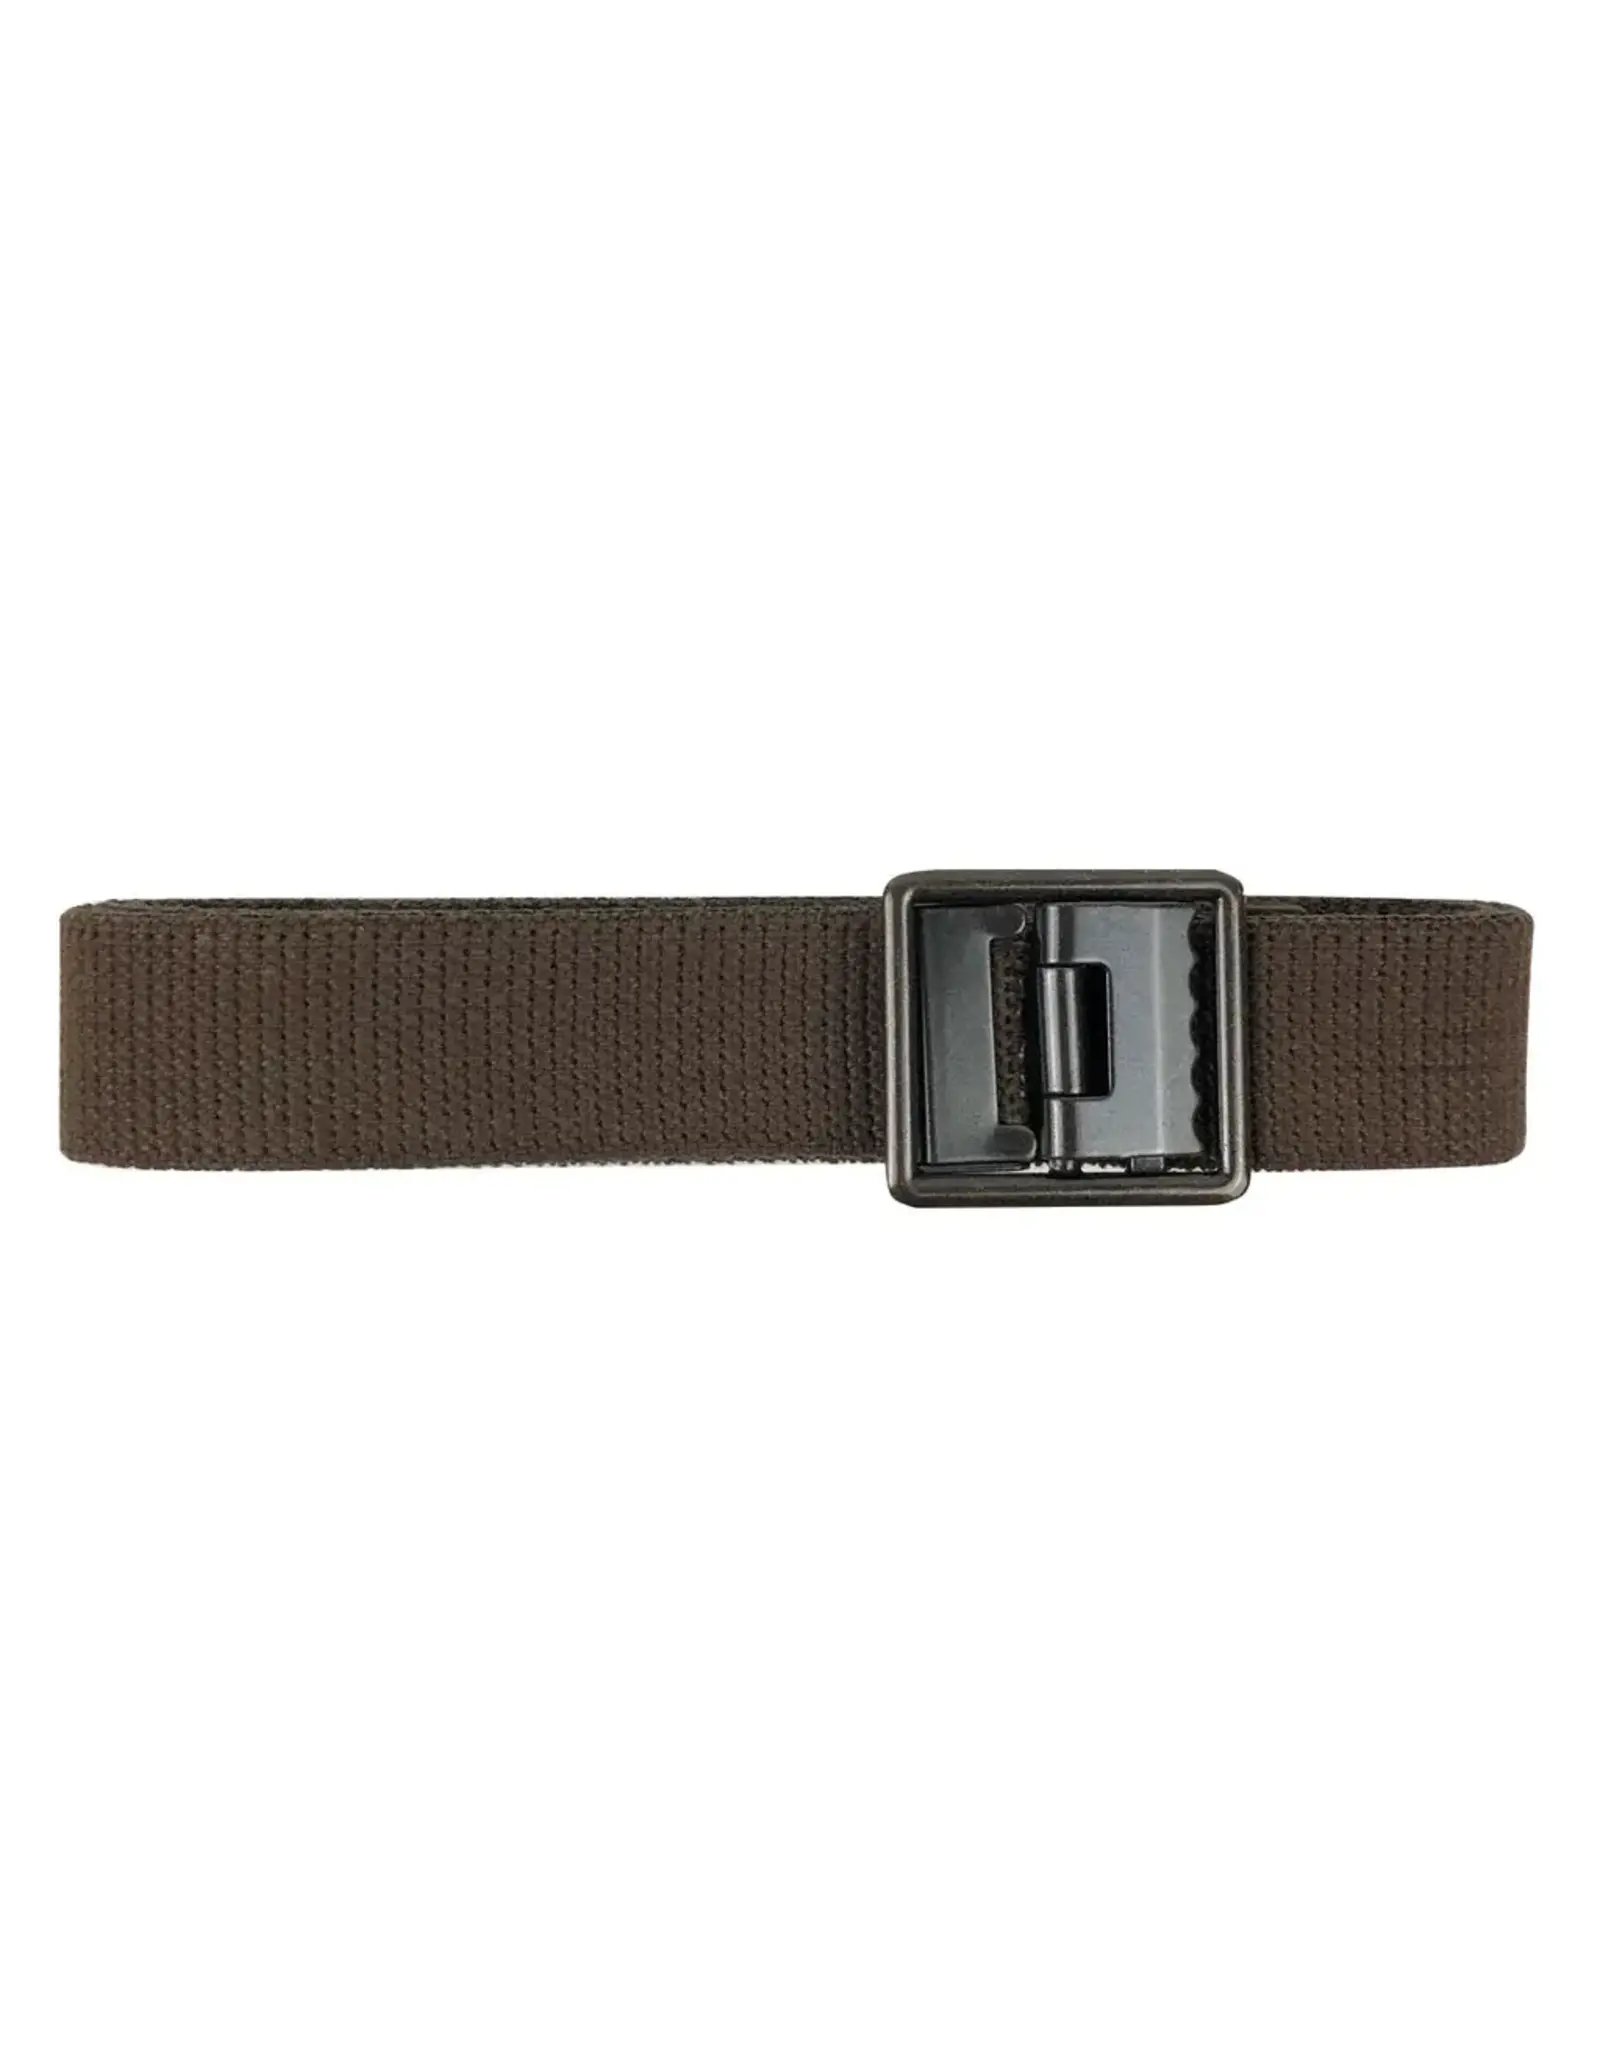 Vanguard Web Belt Brown Cotton with AGSU Buckle and Tip